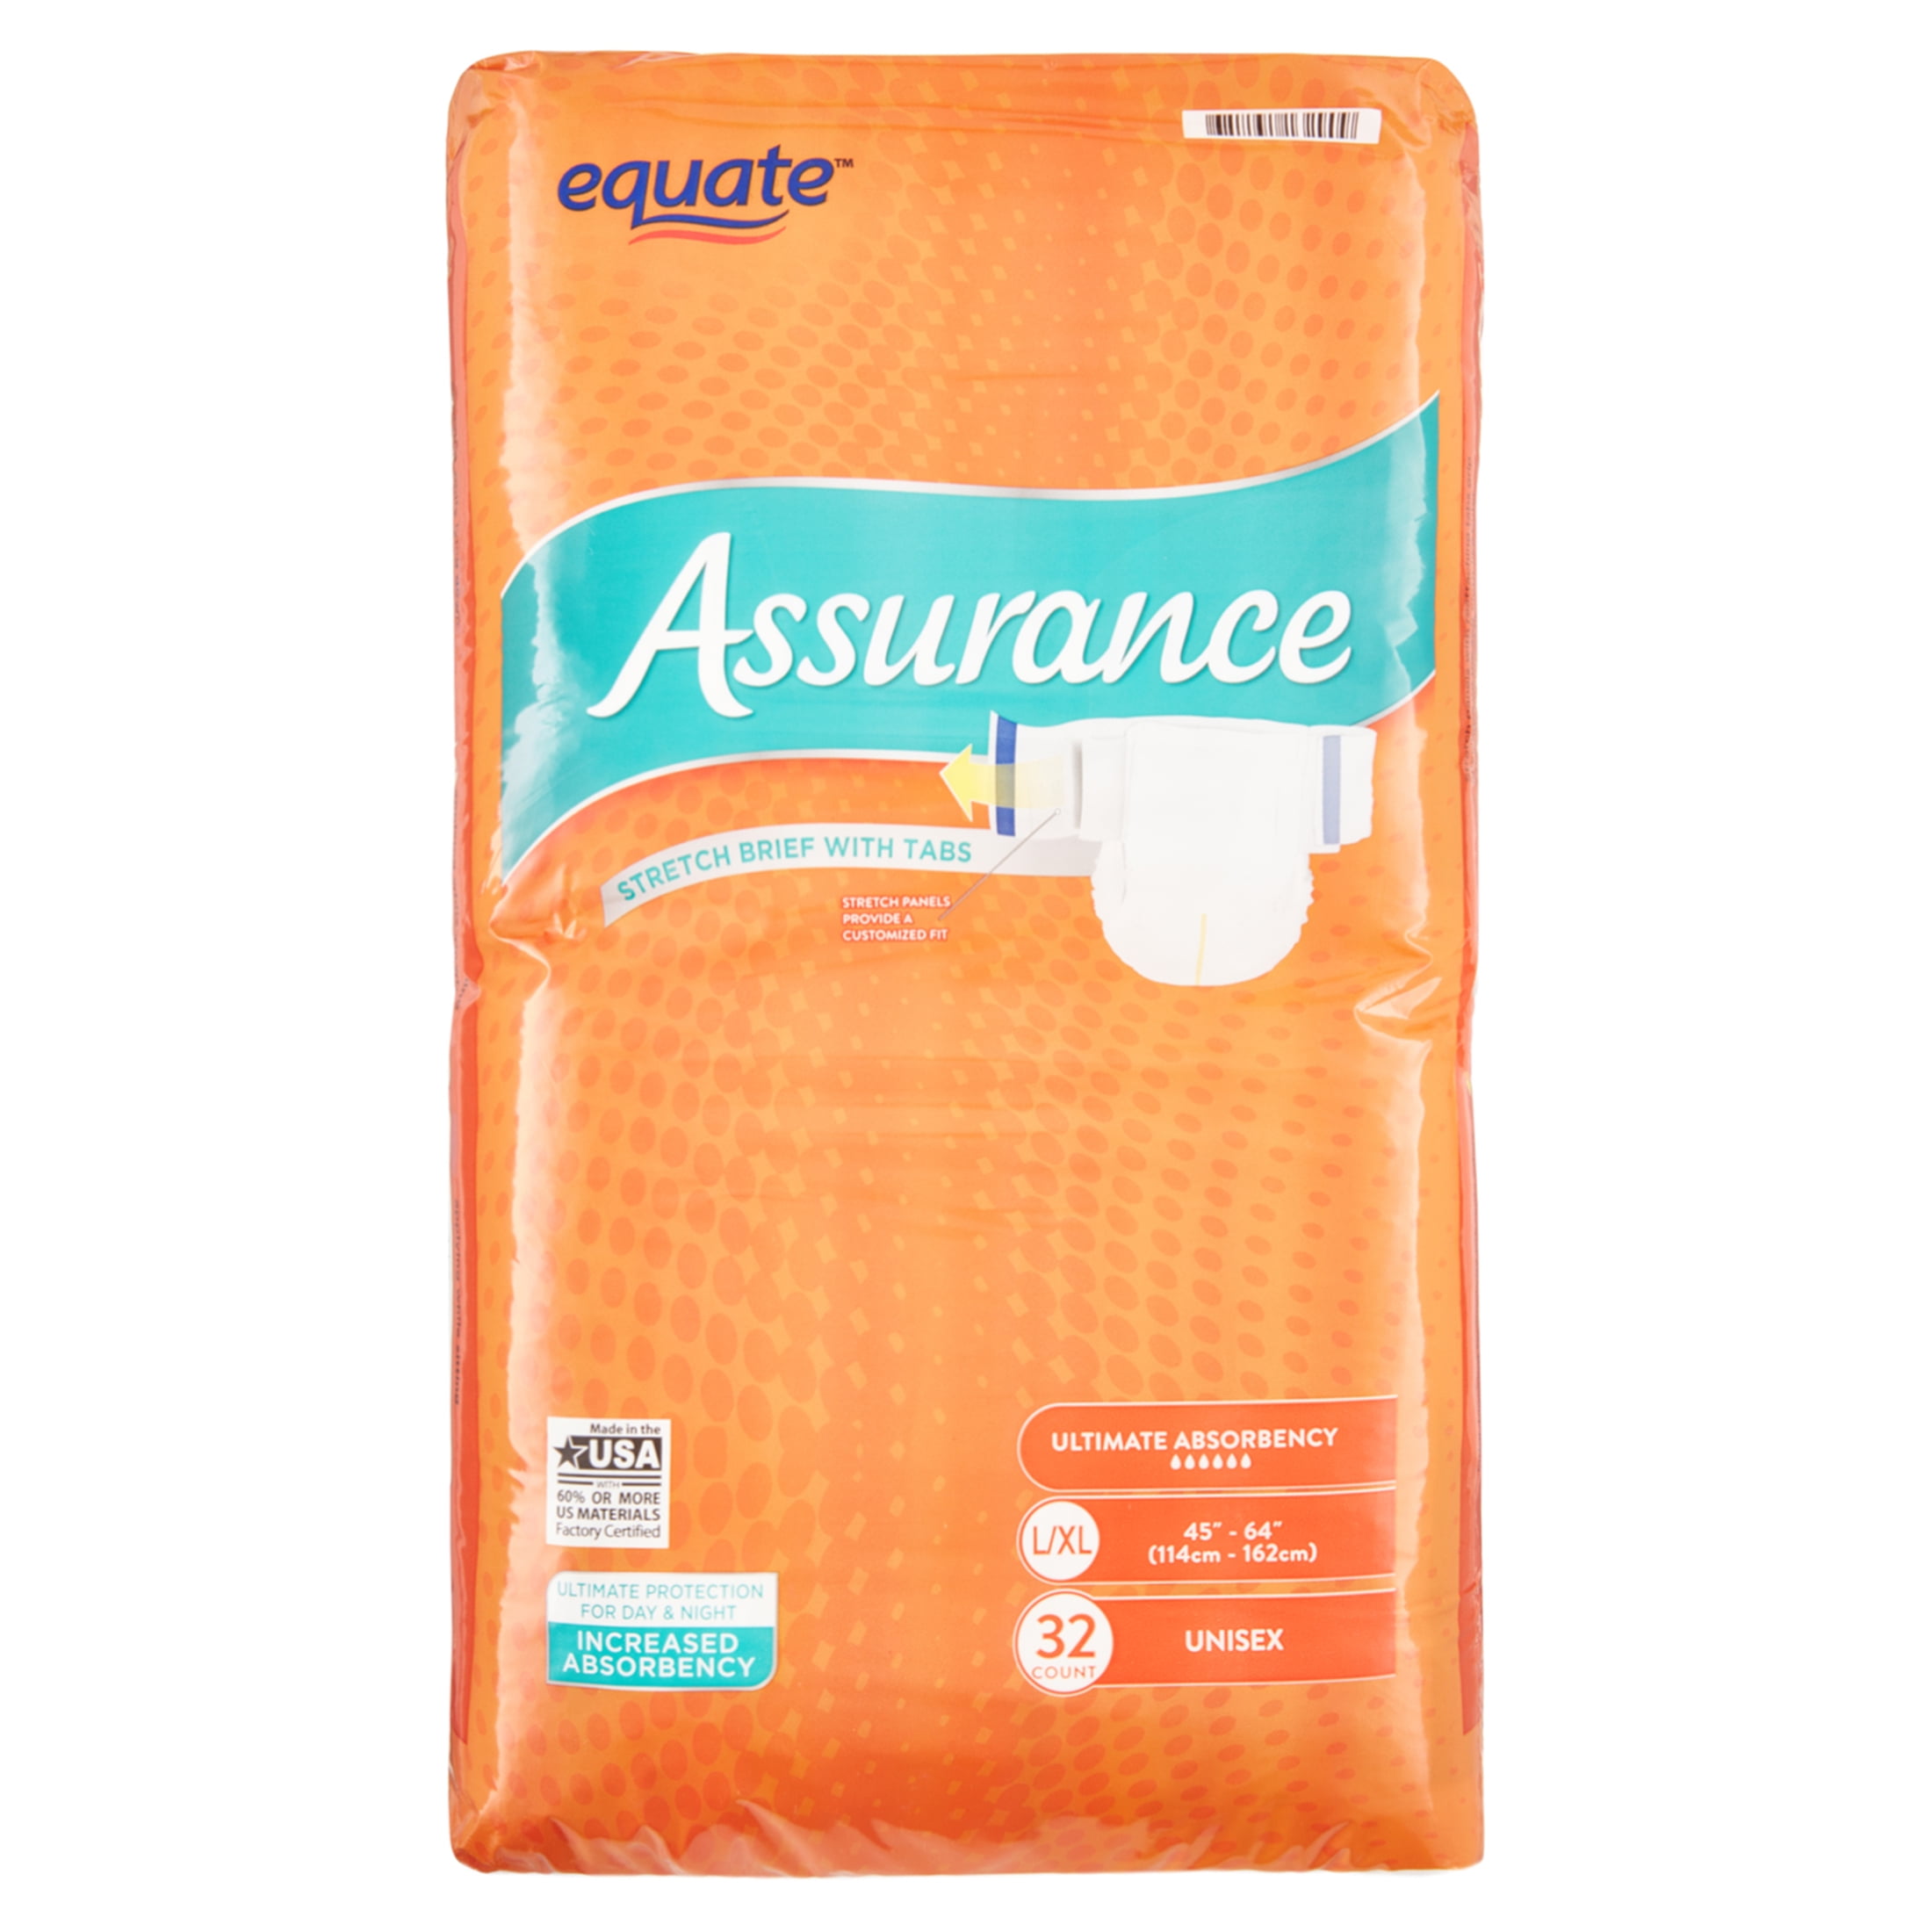 Assurance Unisex Incontinence Stretch Briefs With Nepal